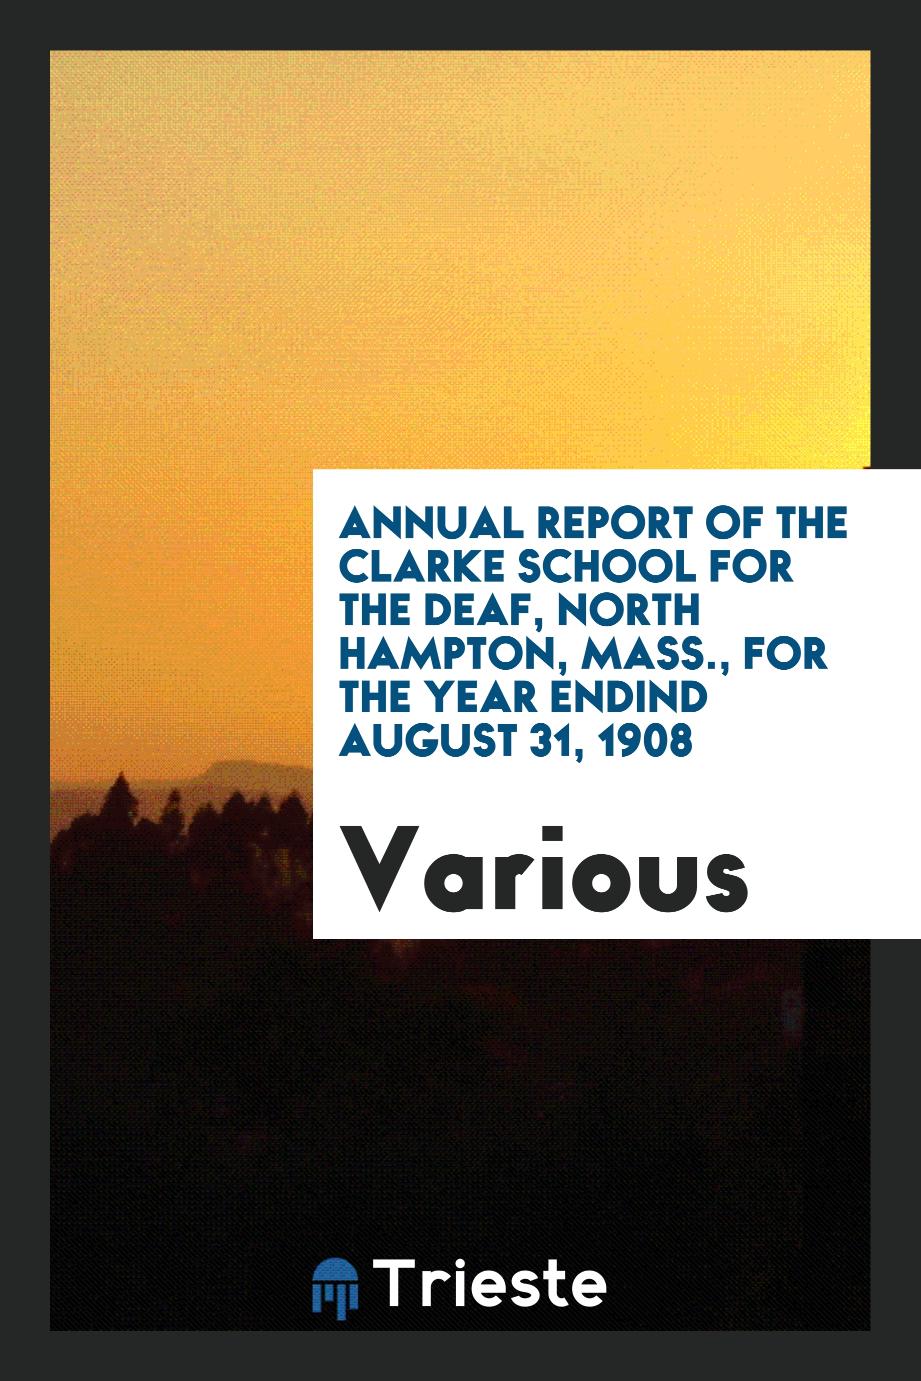 Annual Report of the Clarke School for the Deaf, North Hampton, Mass., for the year endind August 31, 1908